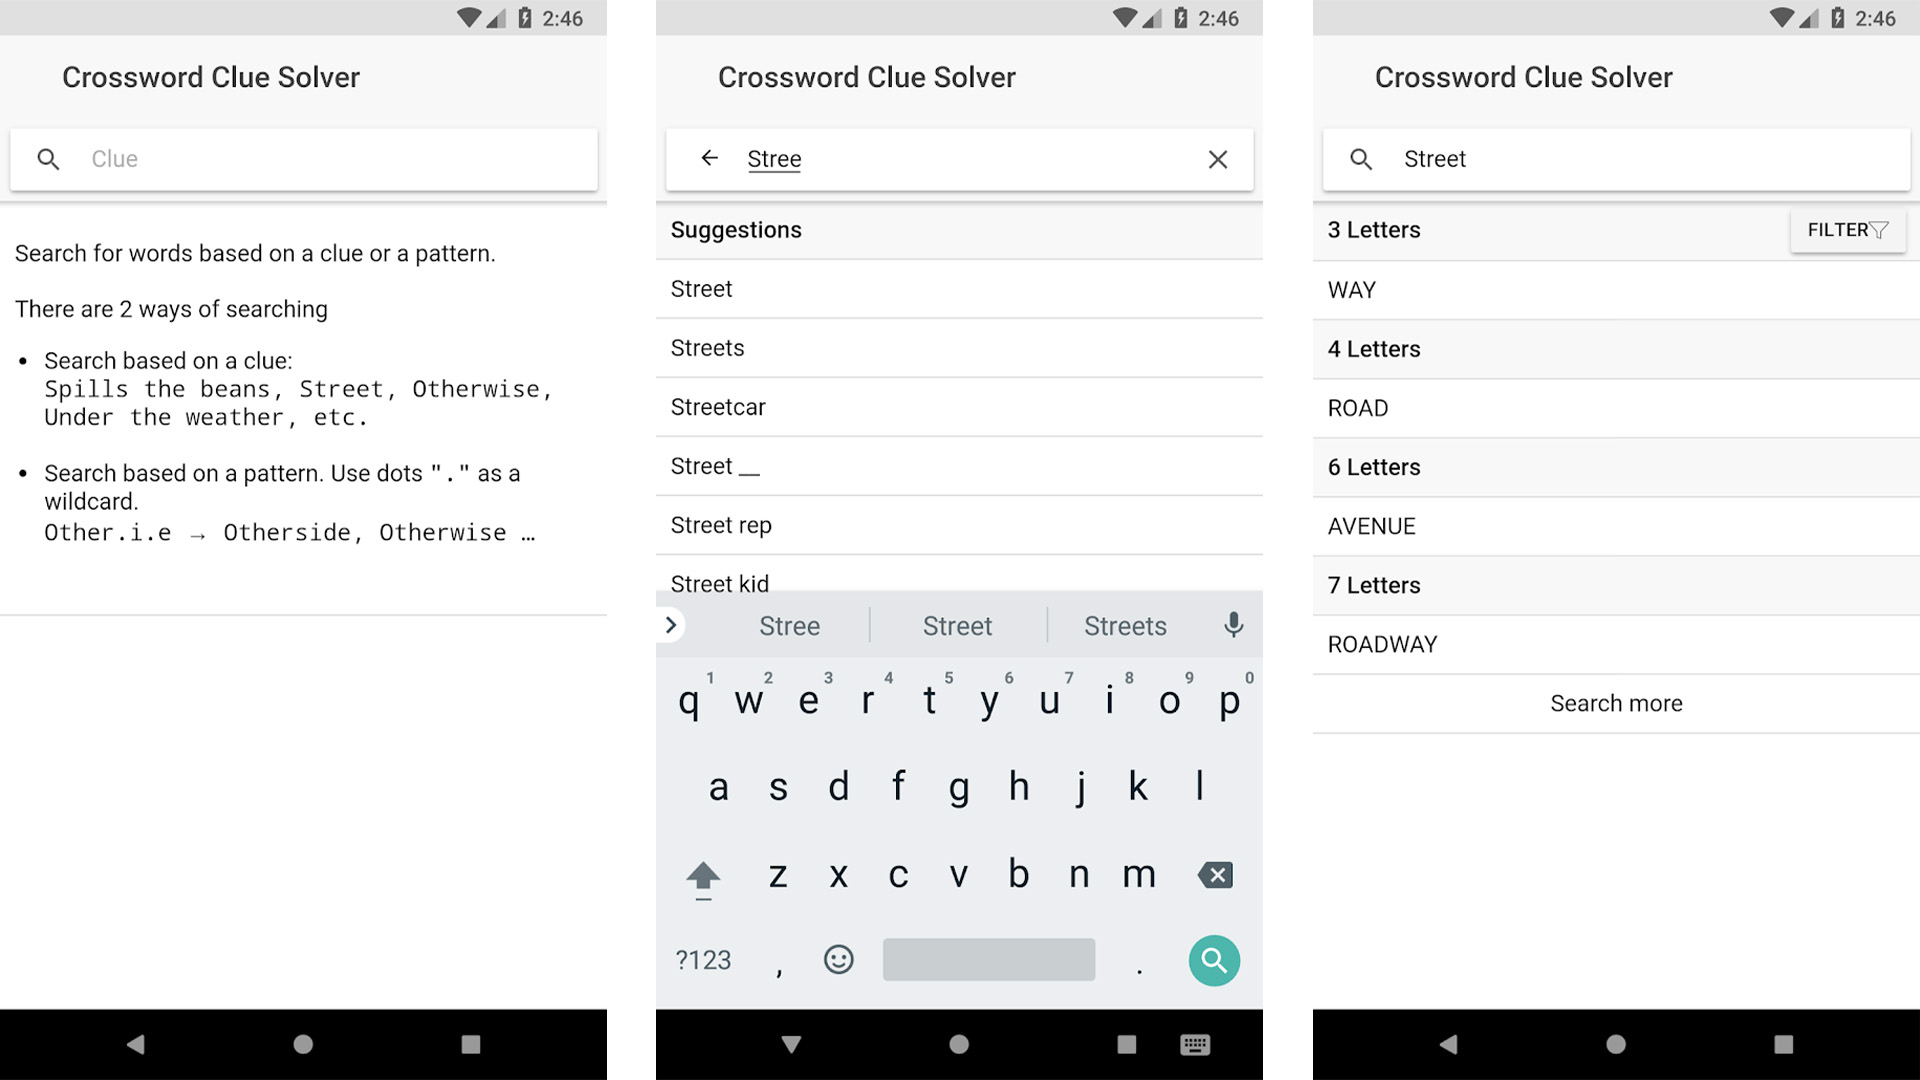 Crossword Clue Solver is one of the best crossword solvers for android